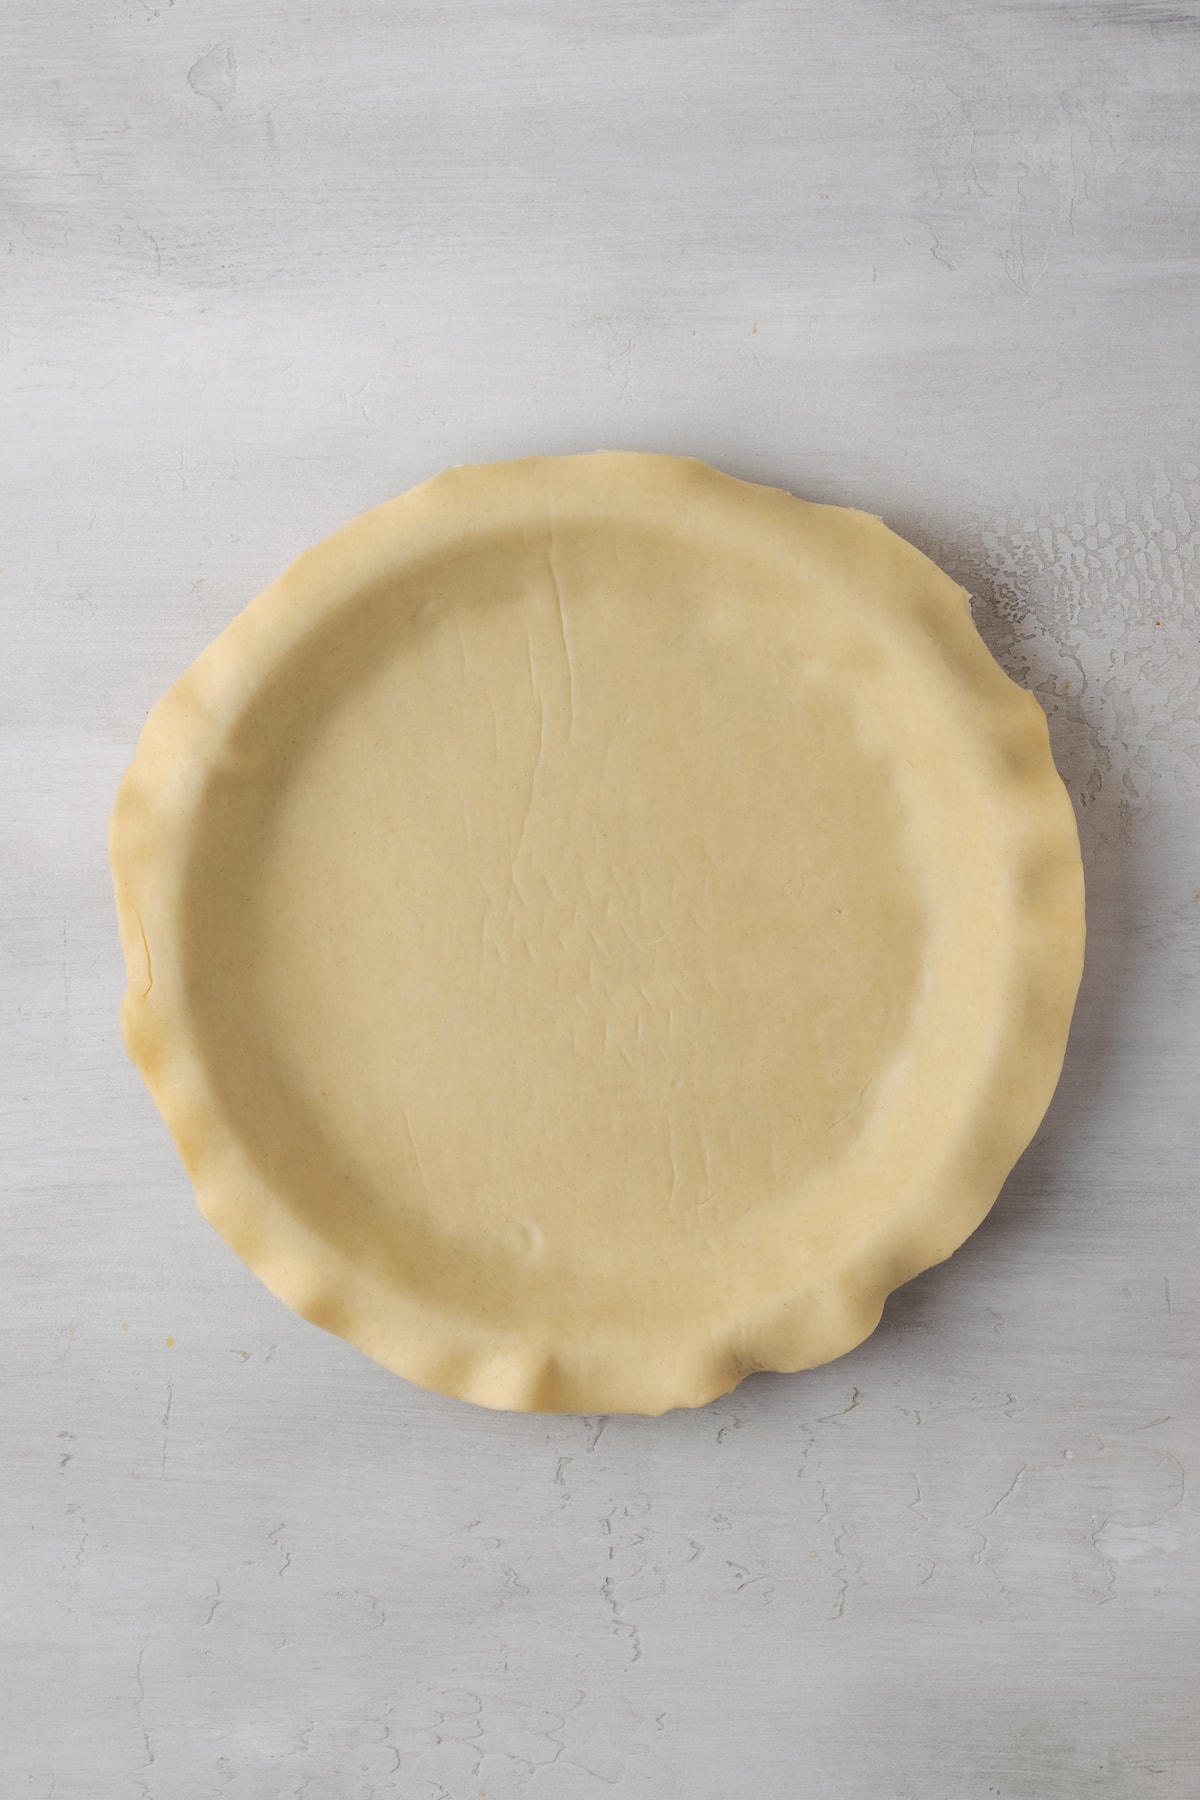 A flaky pie crust pressed into a 9-inch pie plate.